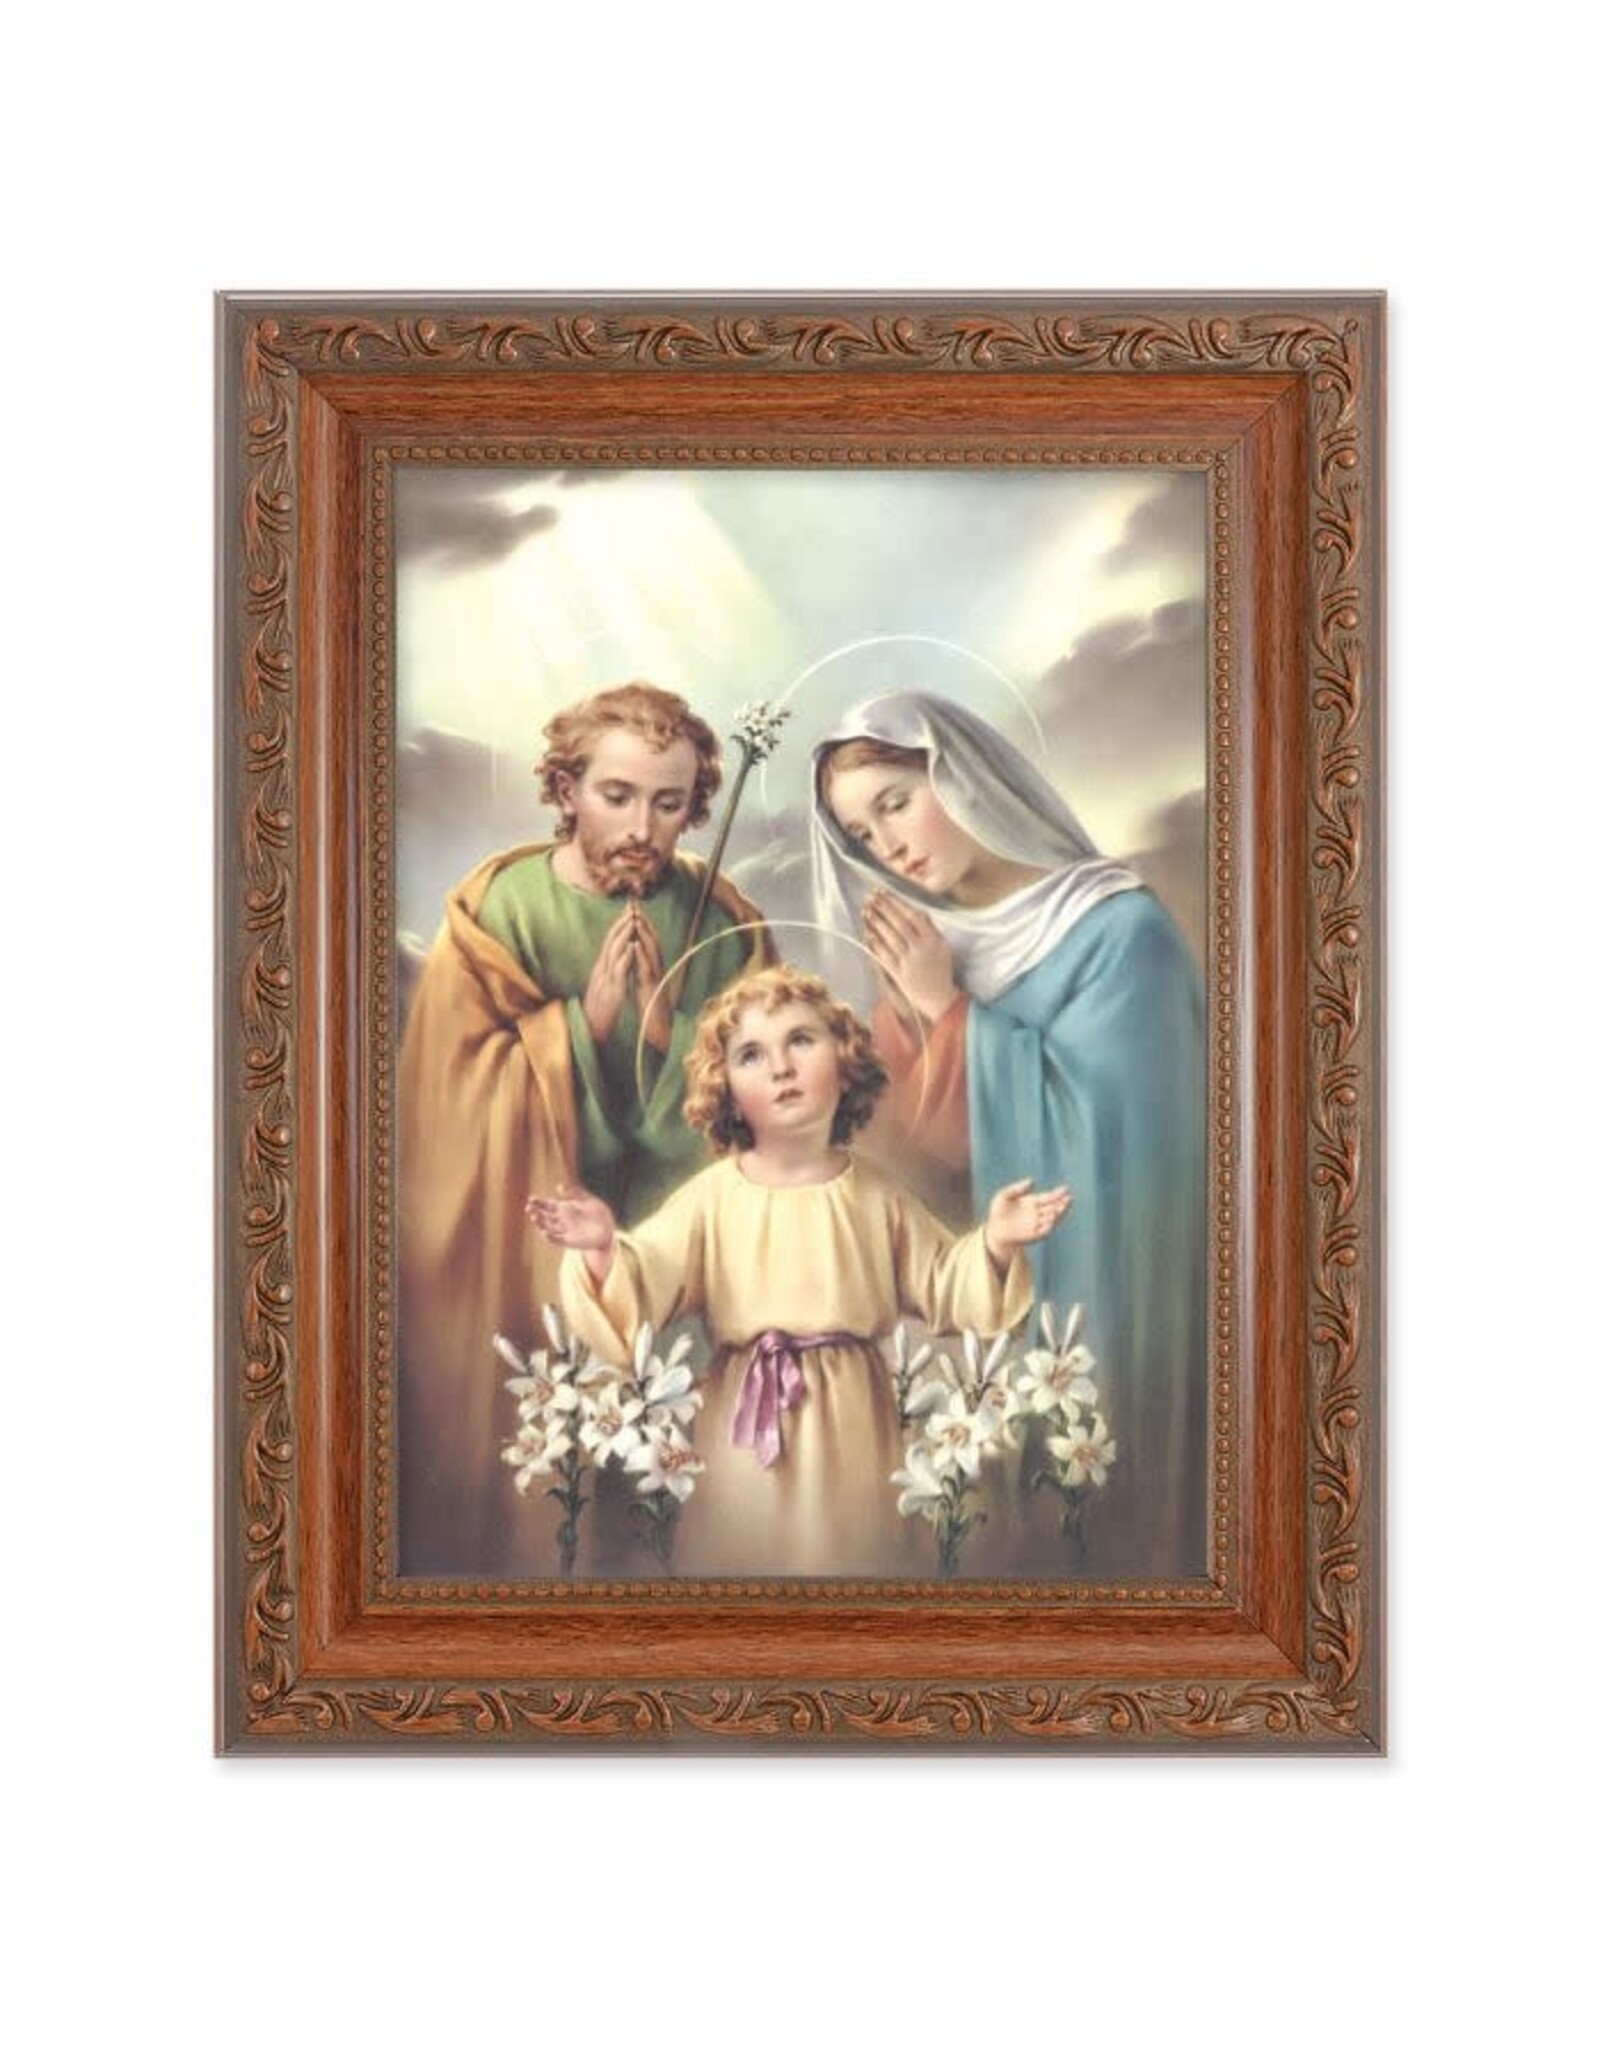 Hirten Holy Family Picture - Ornate Wood Frame (6 x 8" Picture, 8.25 x 10.25" Frame)